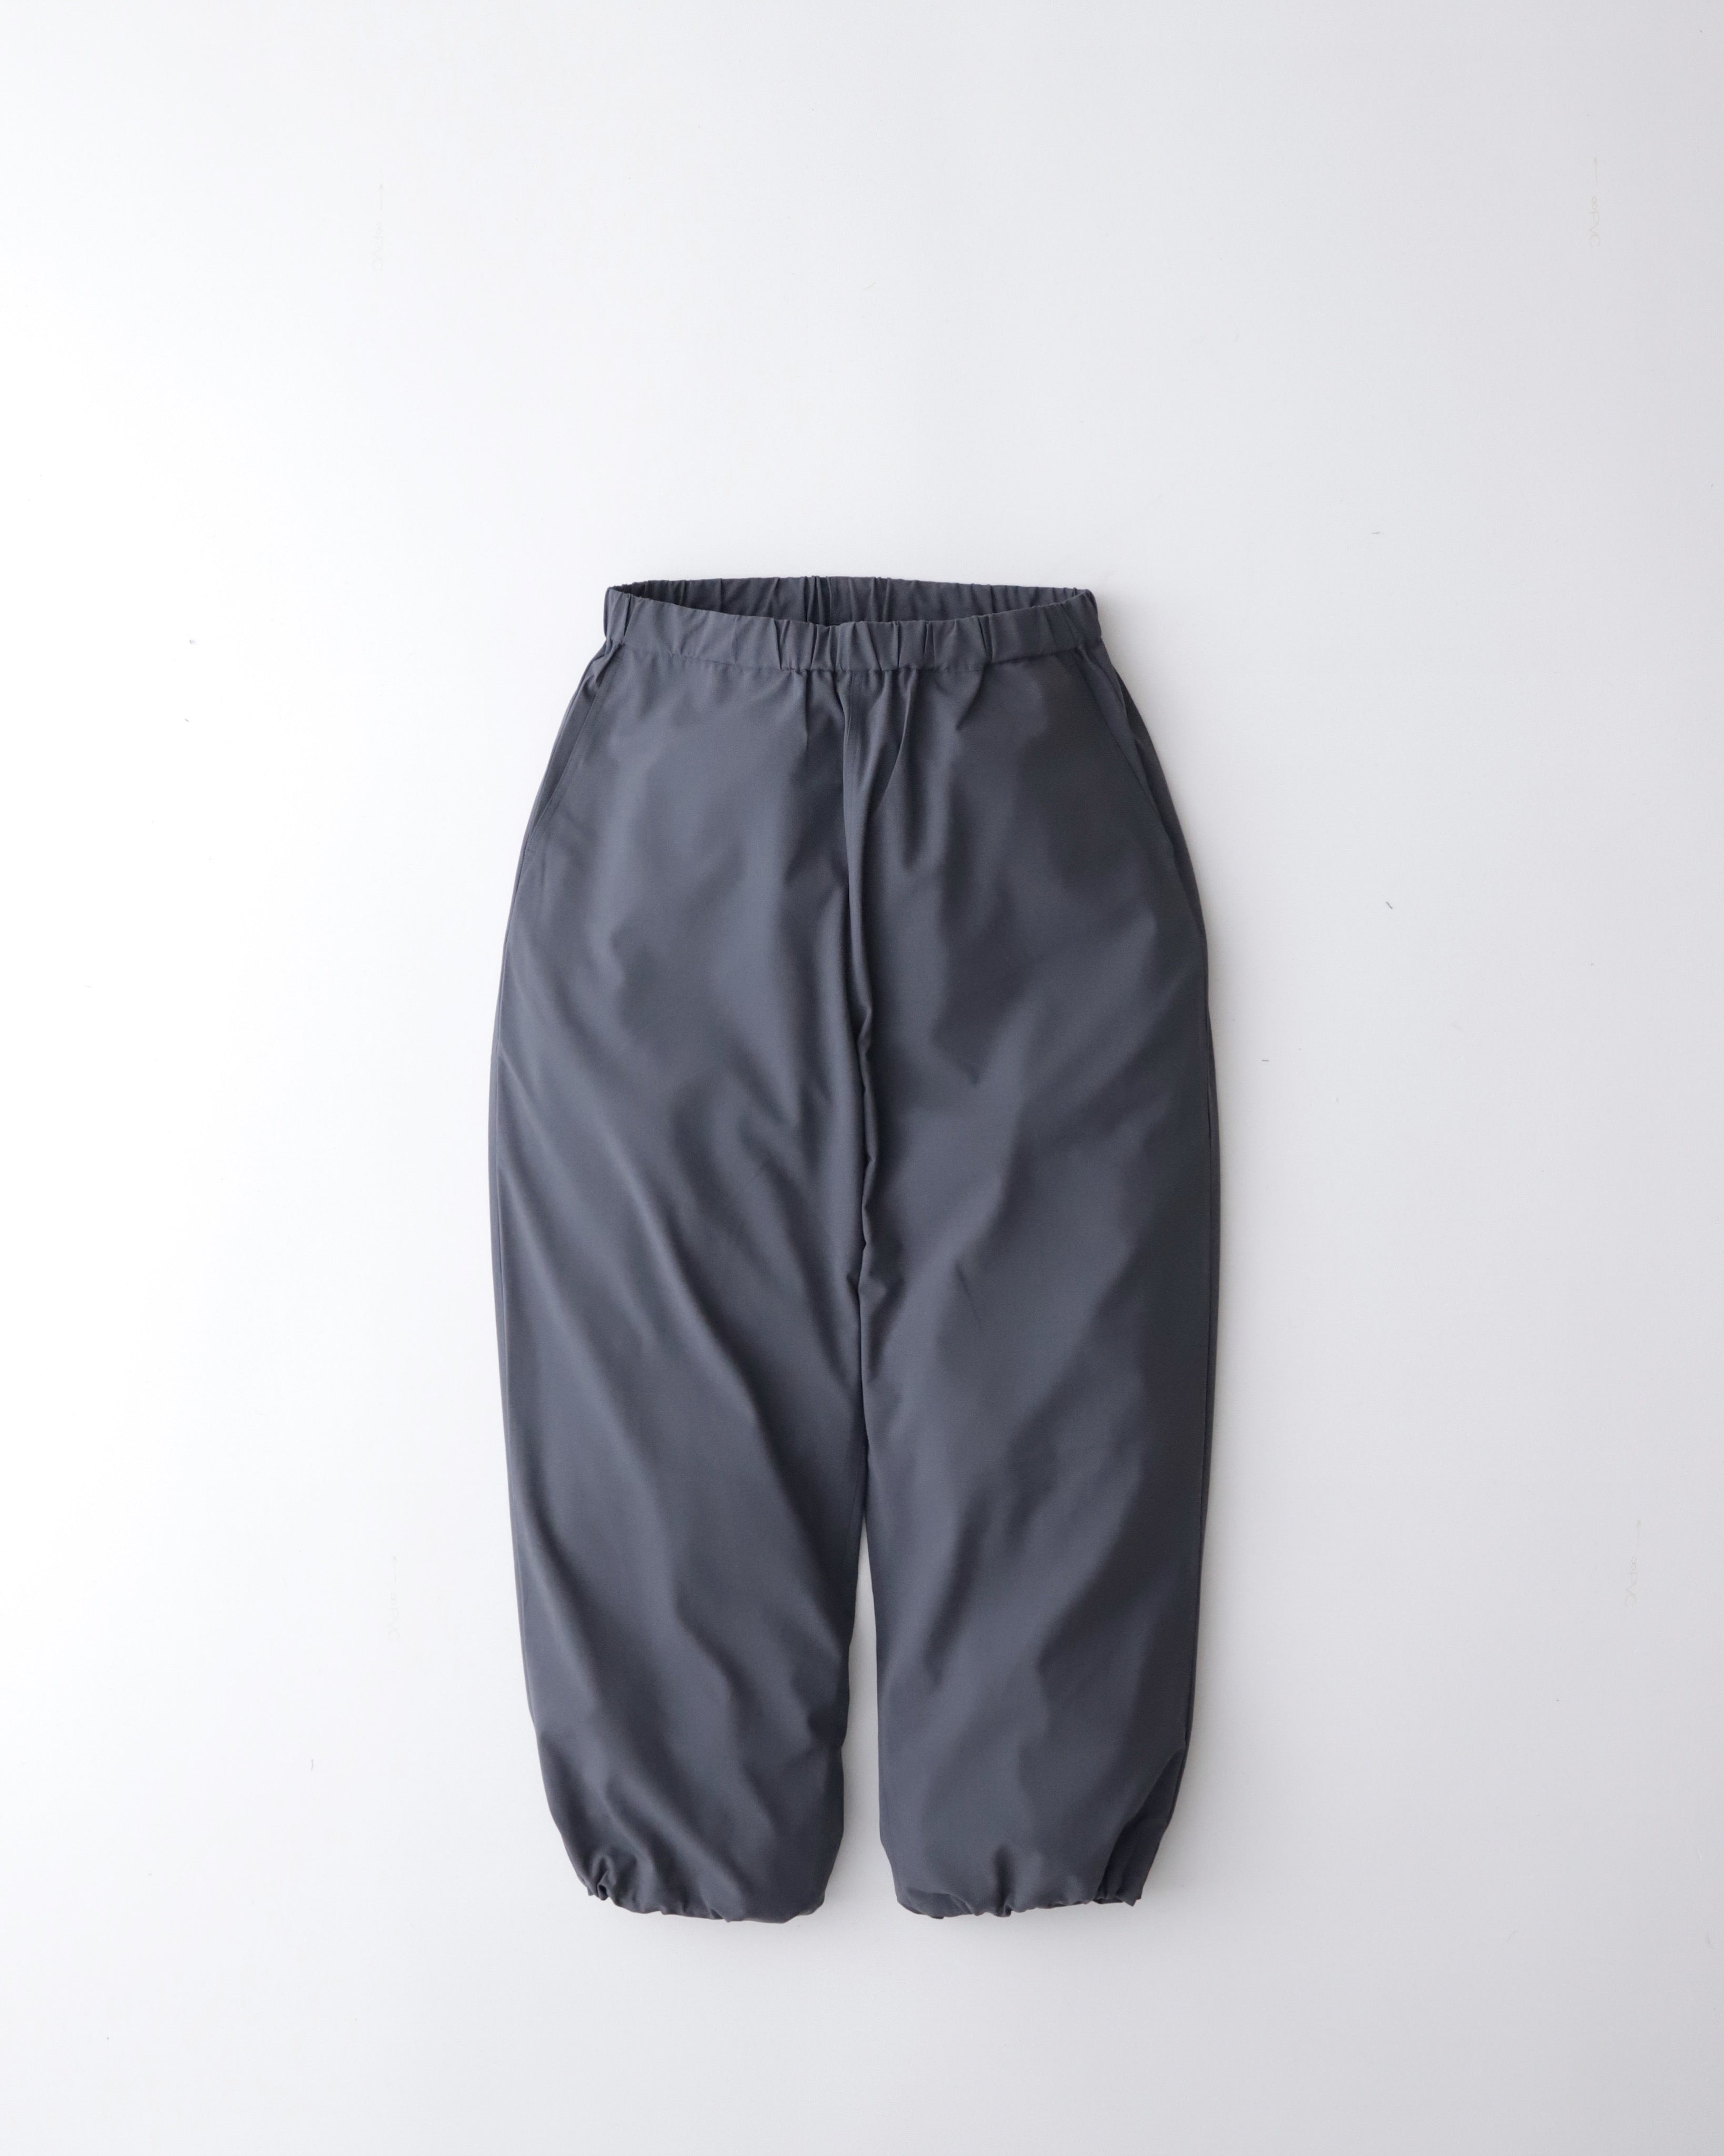 WOOLY CLOTH UTILITY OVER PANTS